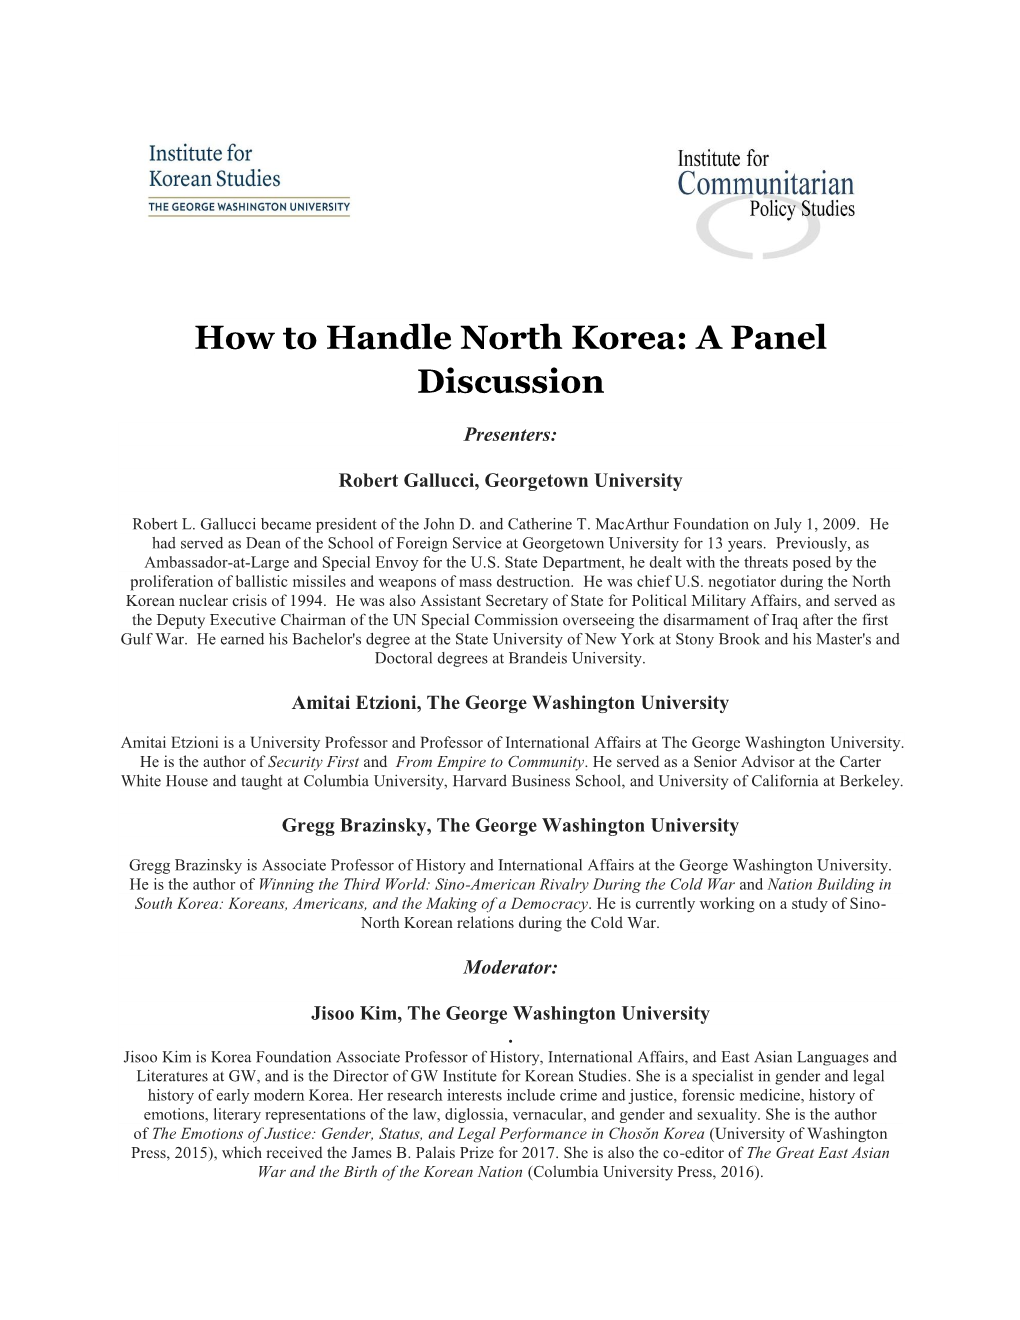 How to Handle North Korea: a Panel Discussion